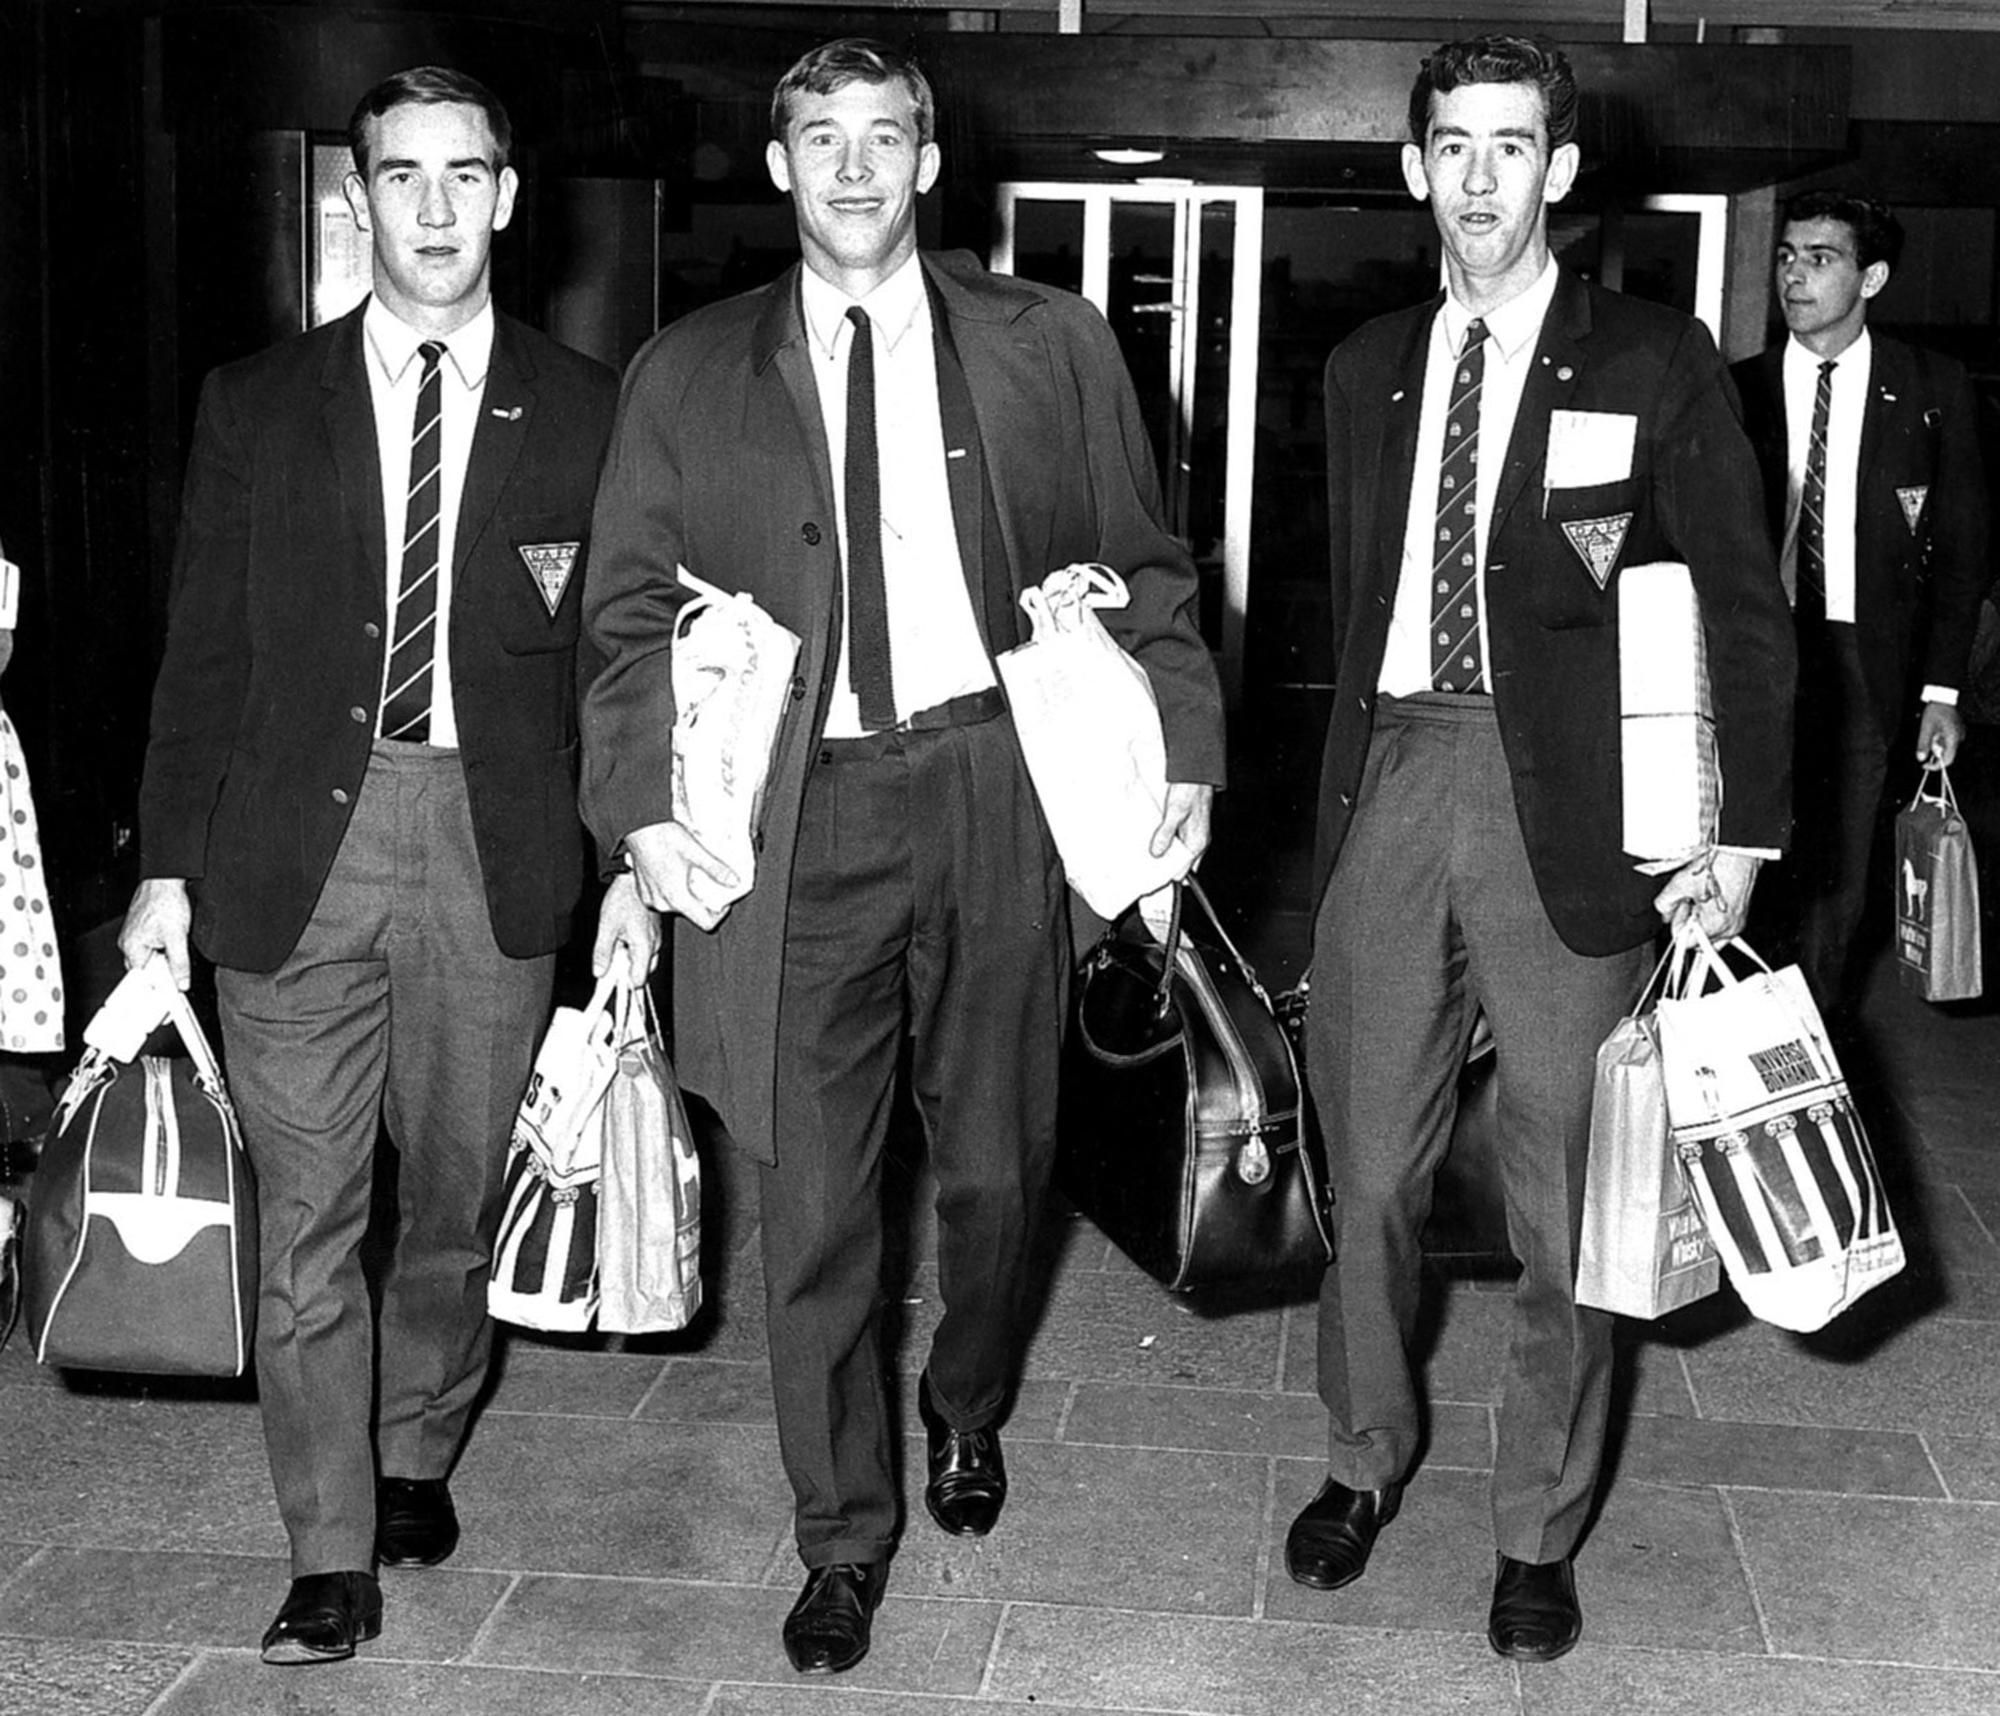 Dunfermline Athletic footballer Alex Ferguson and his team mates Jim Fleming and Tommy Callaghan arrive at Glasgow airport after playing in an Inter Cities Fairs cup tie against Frigg Oslo of Norway.
25th August 1966.